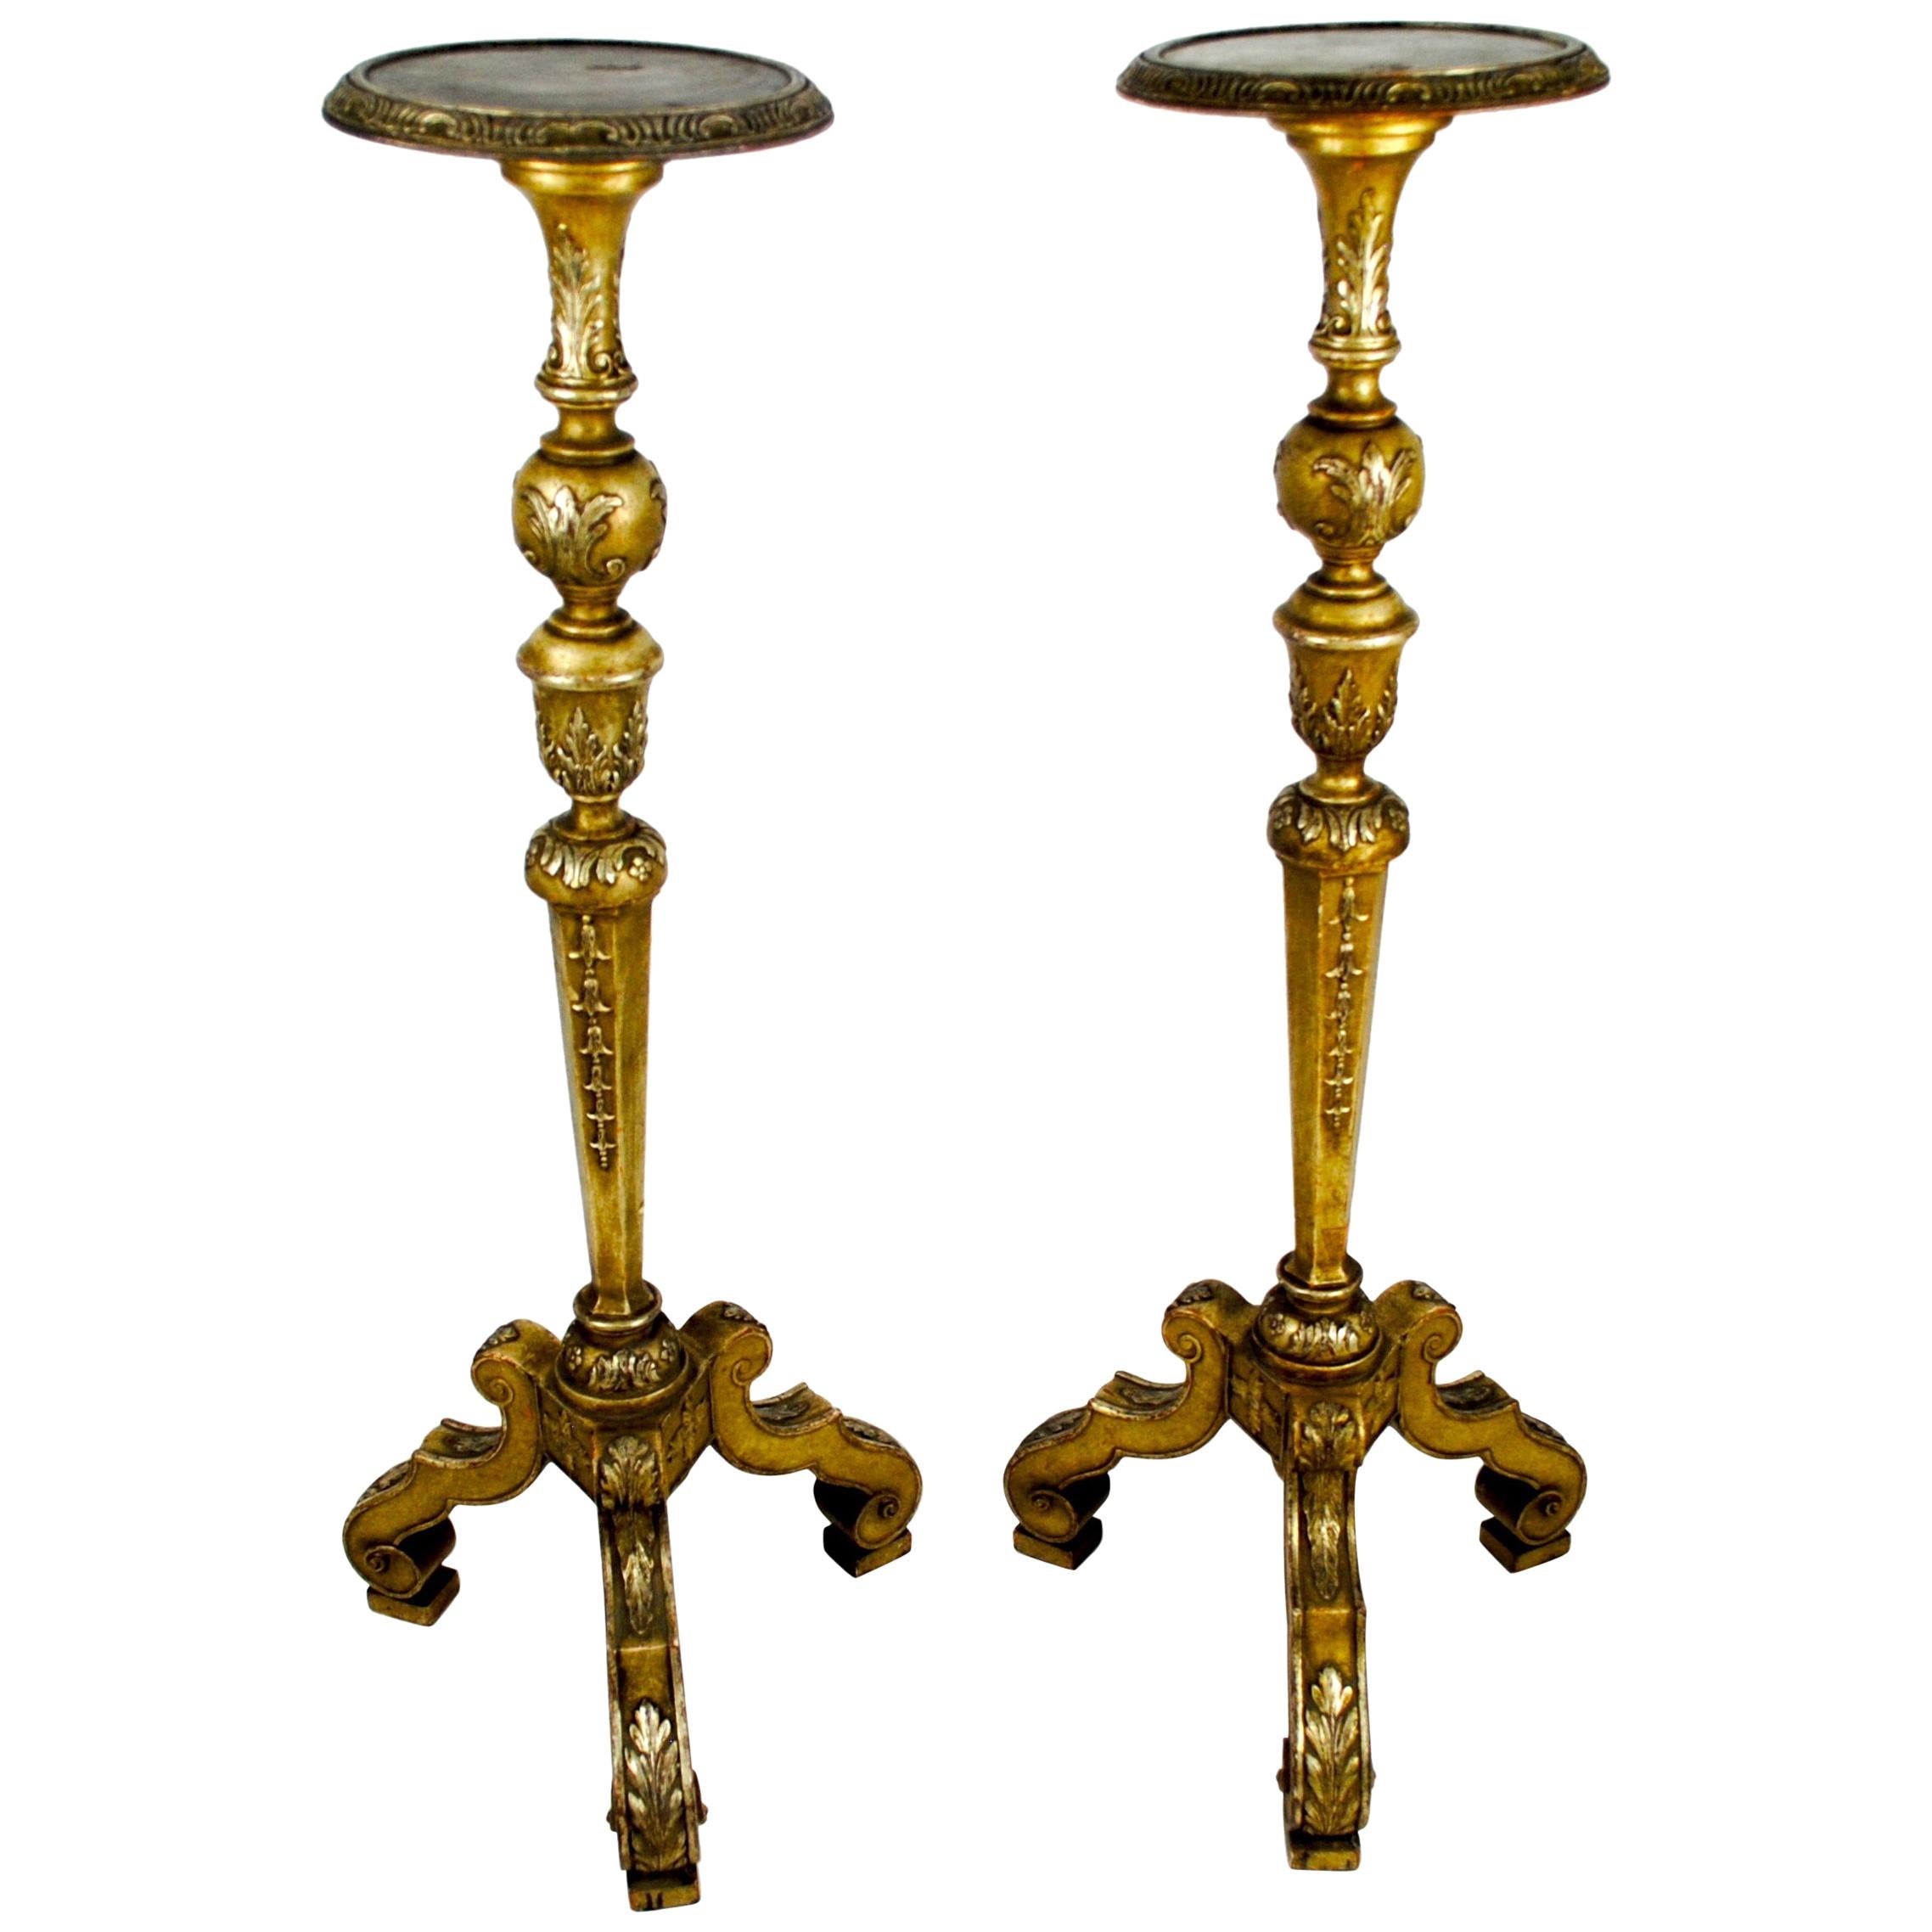 Pair of Italian 19th Century Silver Guilt Torcheres or Candlesticks For Sale